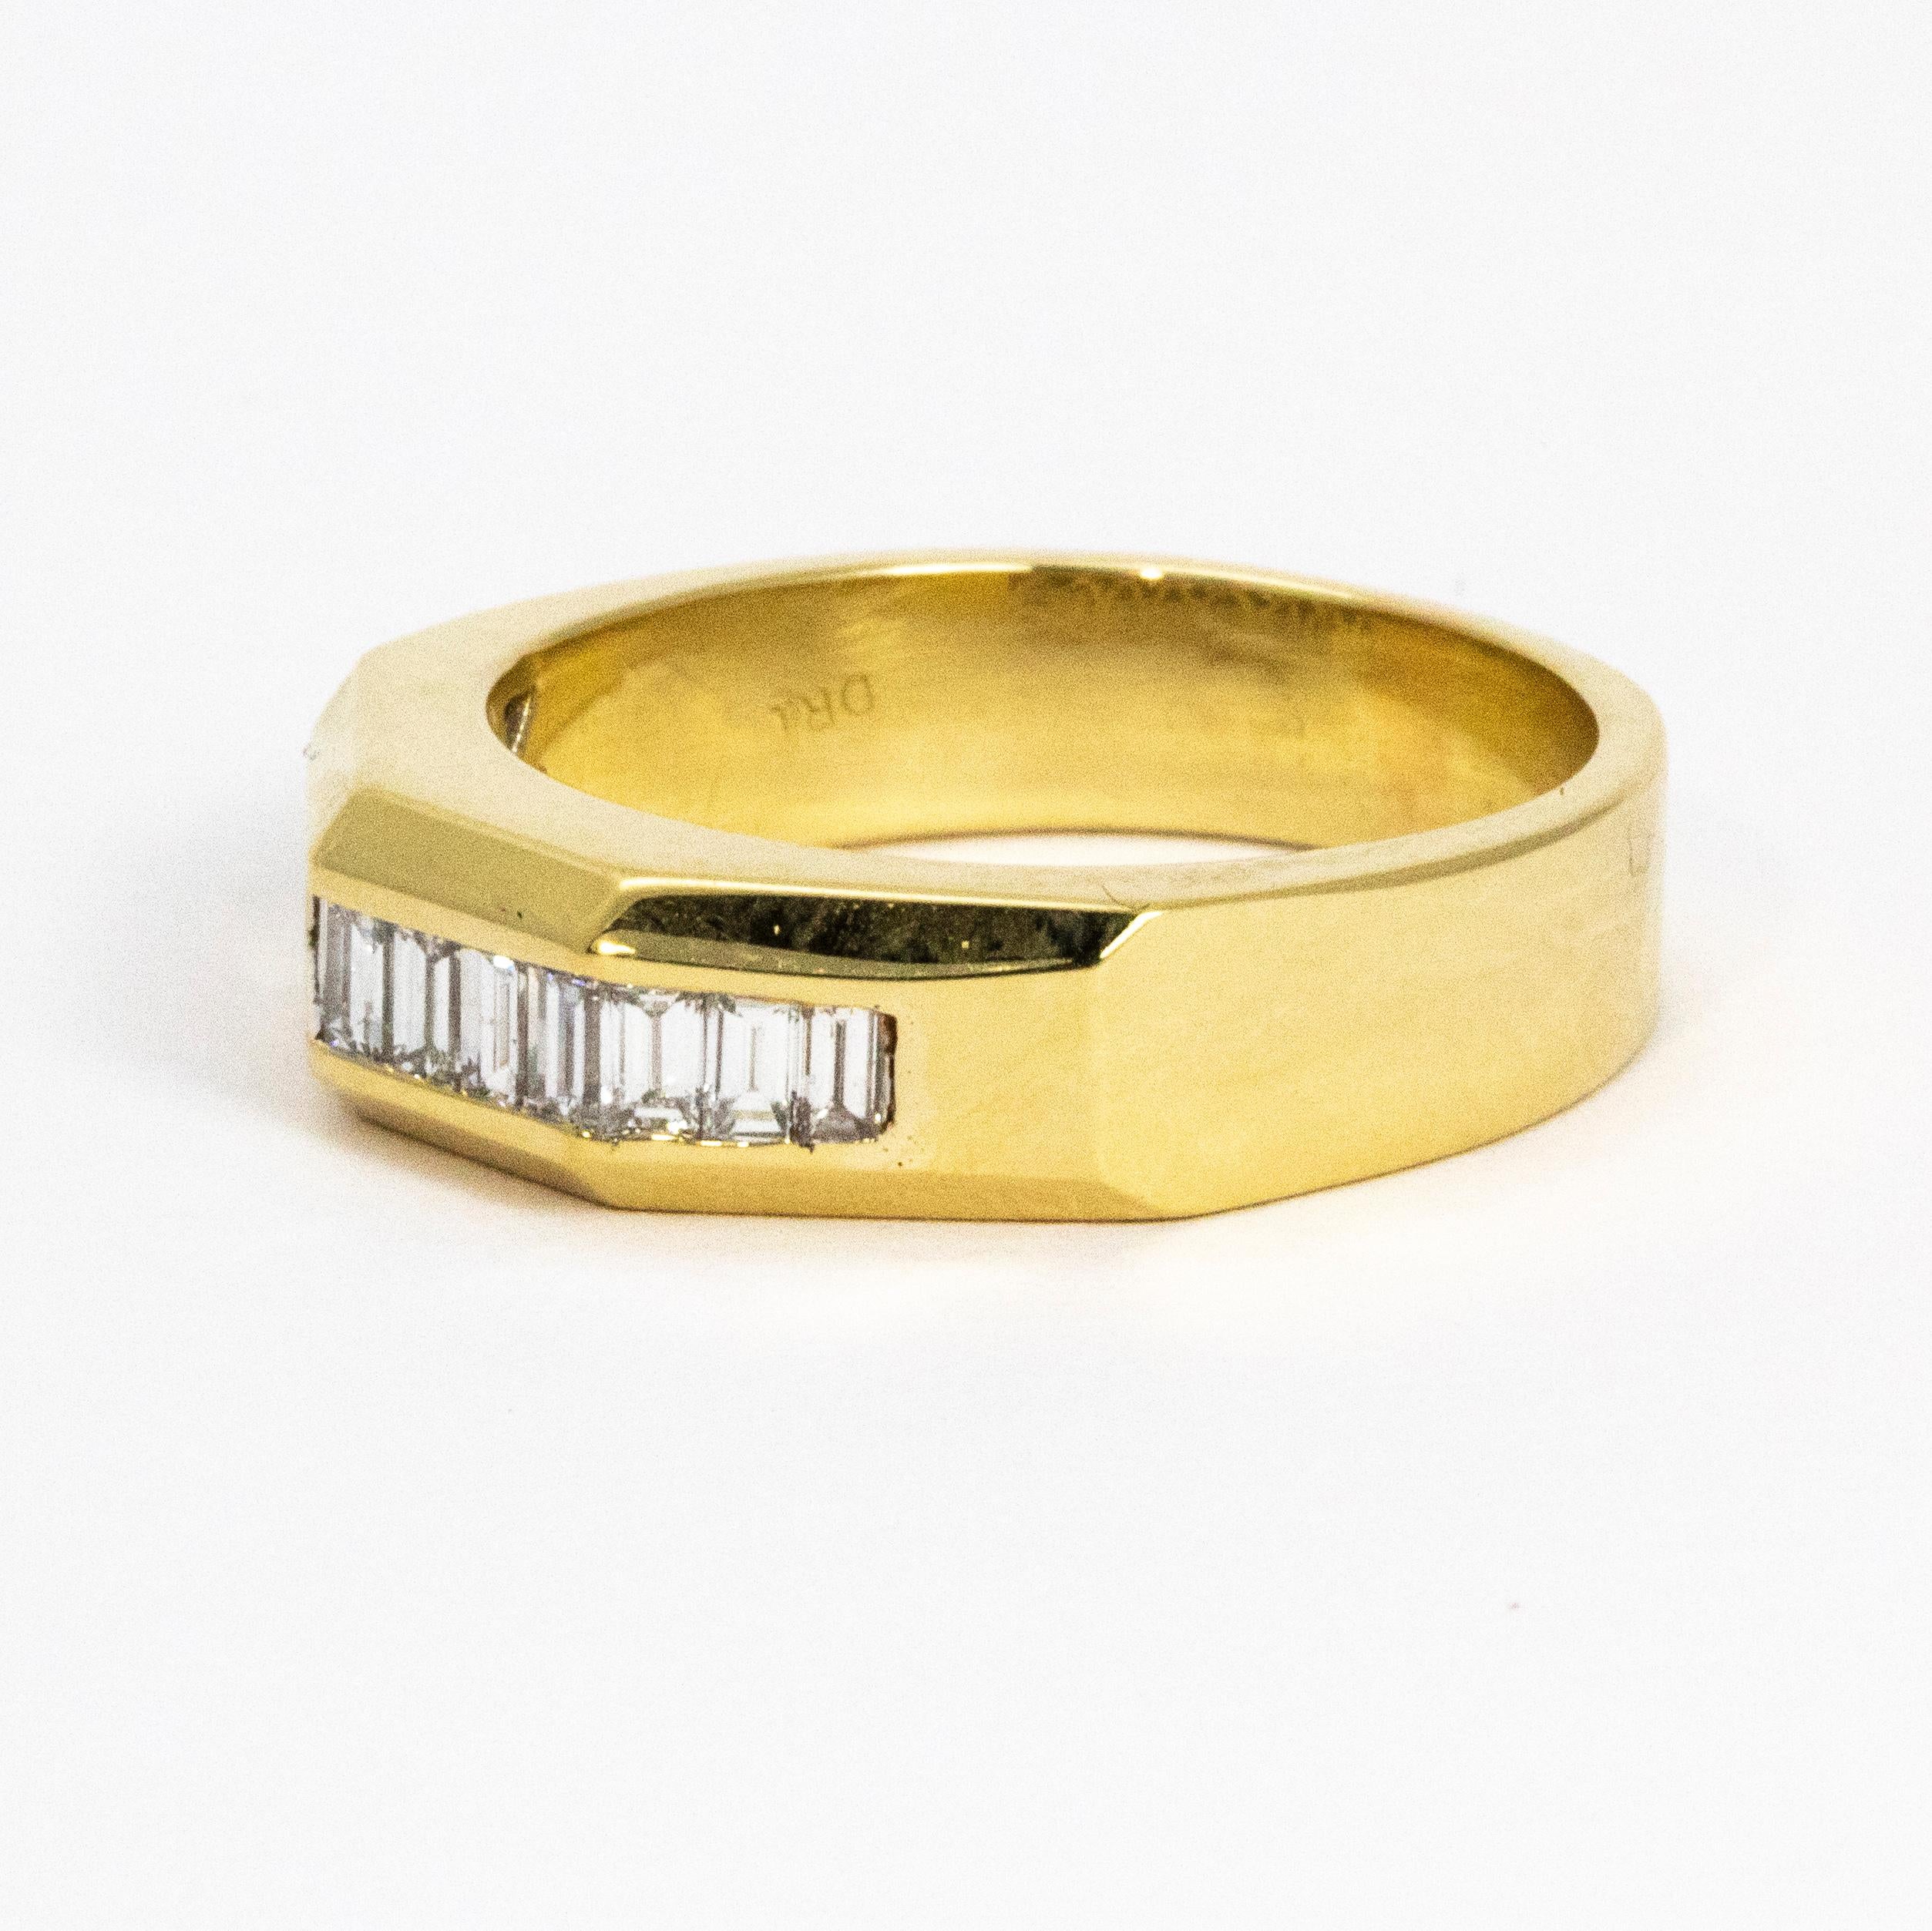 Chunky and modern in design, this ring has a sparkling row of baguette diamonds set in 14ct gold.

Ring Size: U 1/2 or 10 1/4